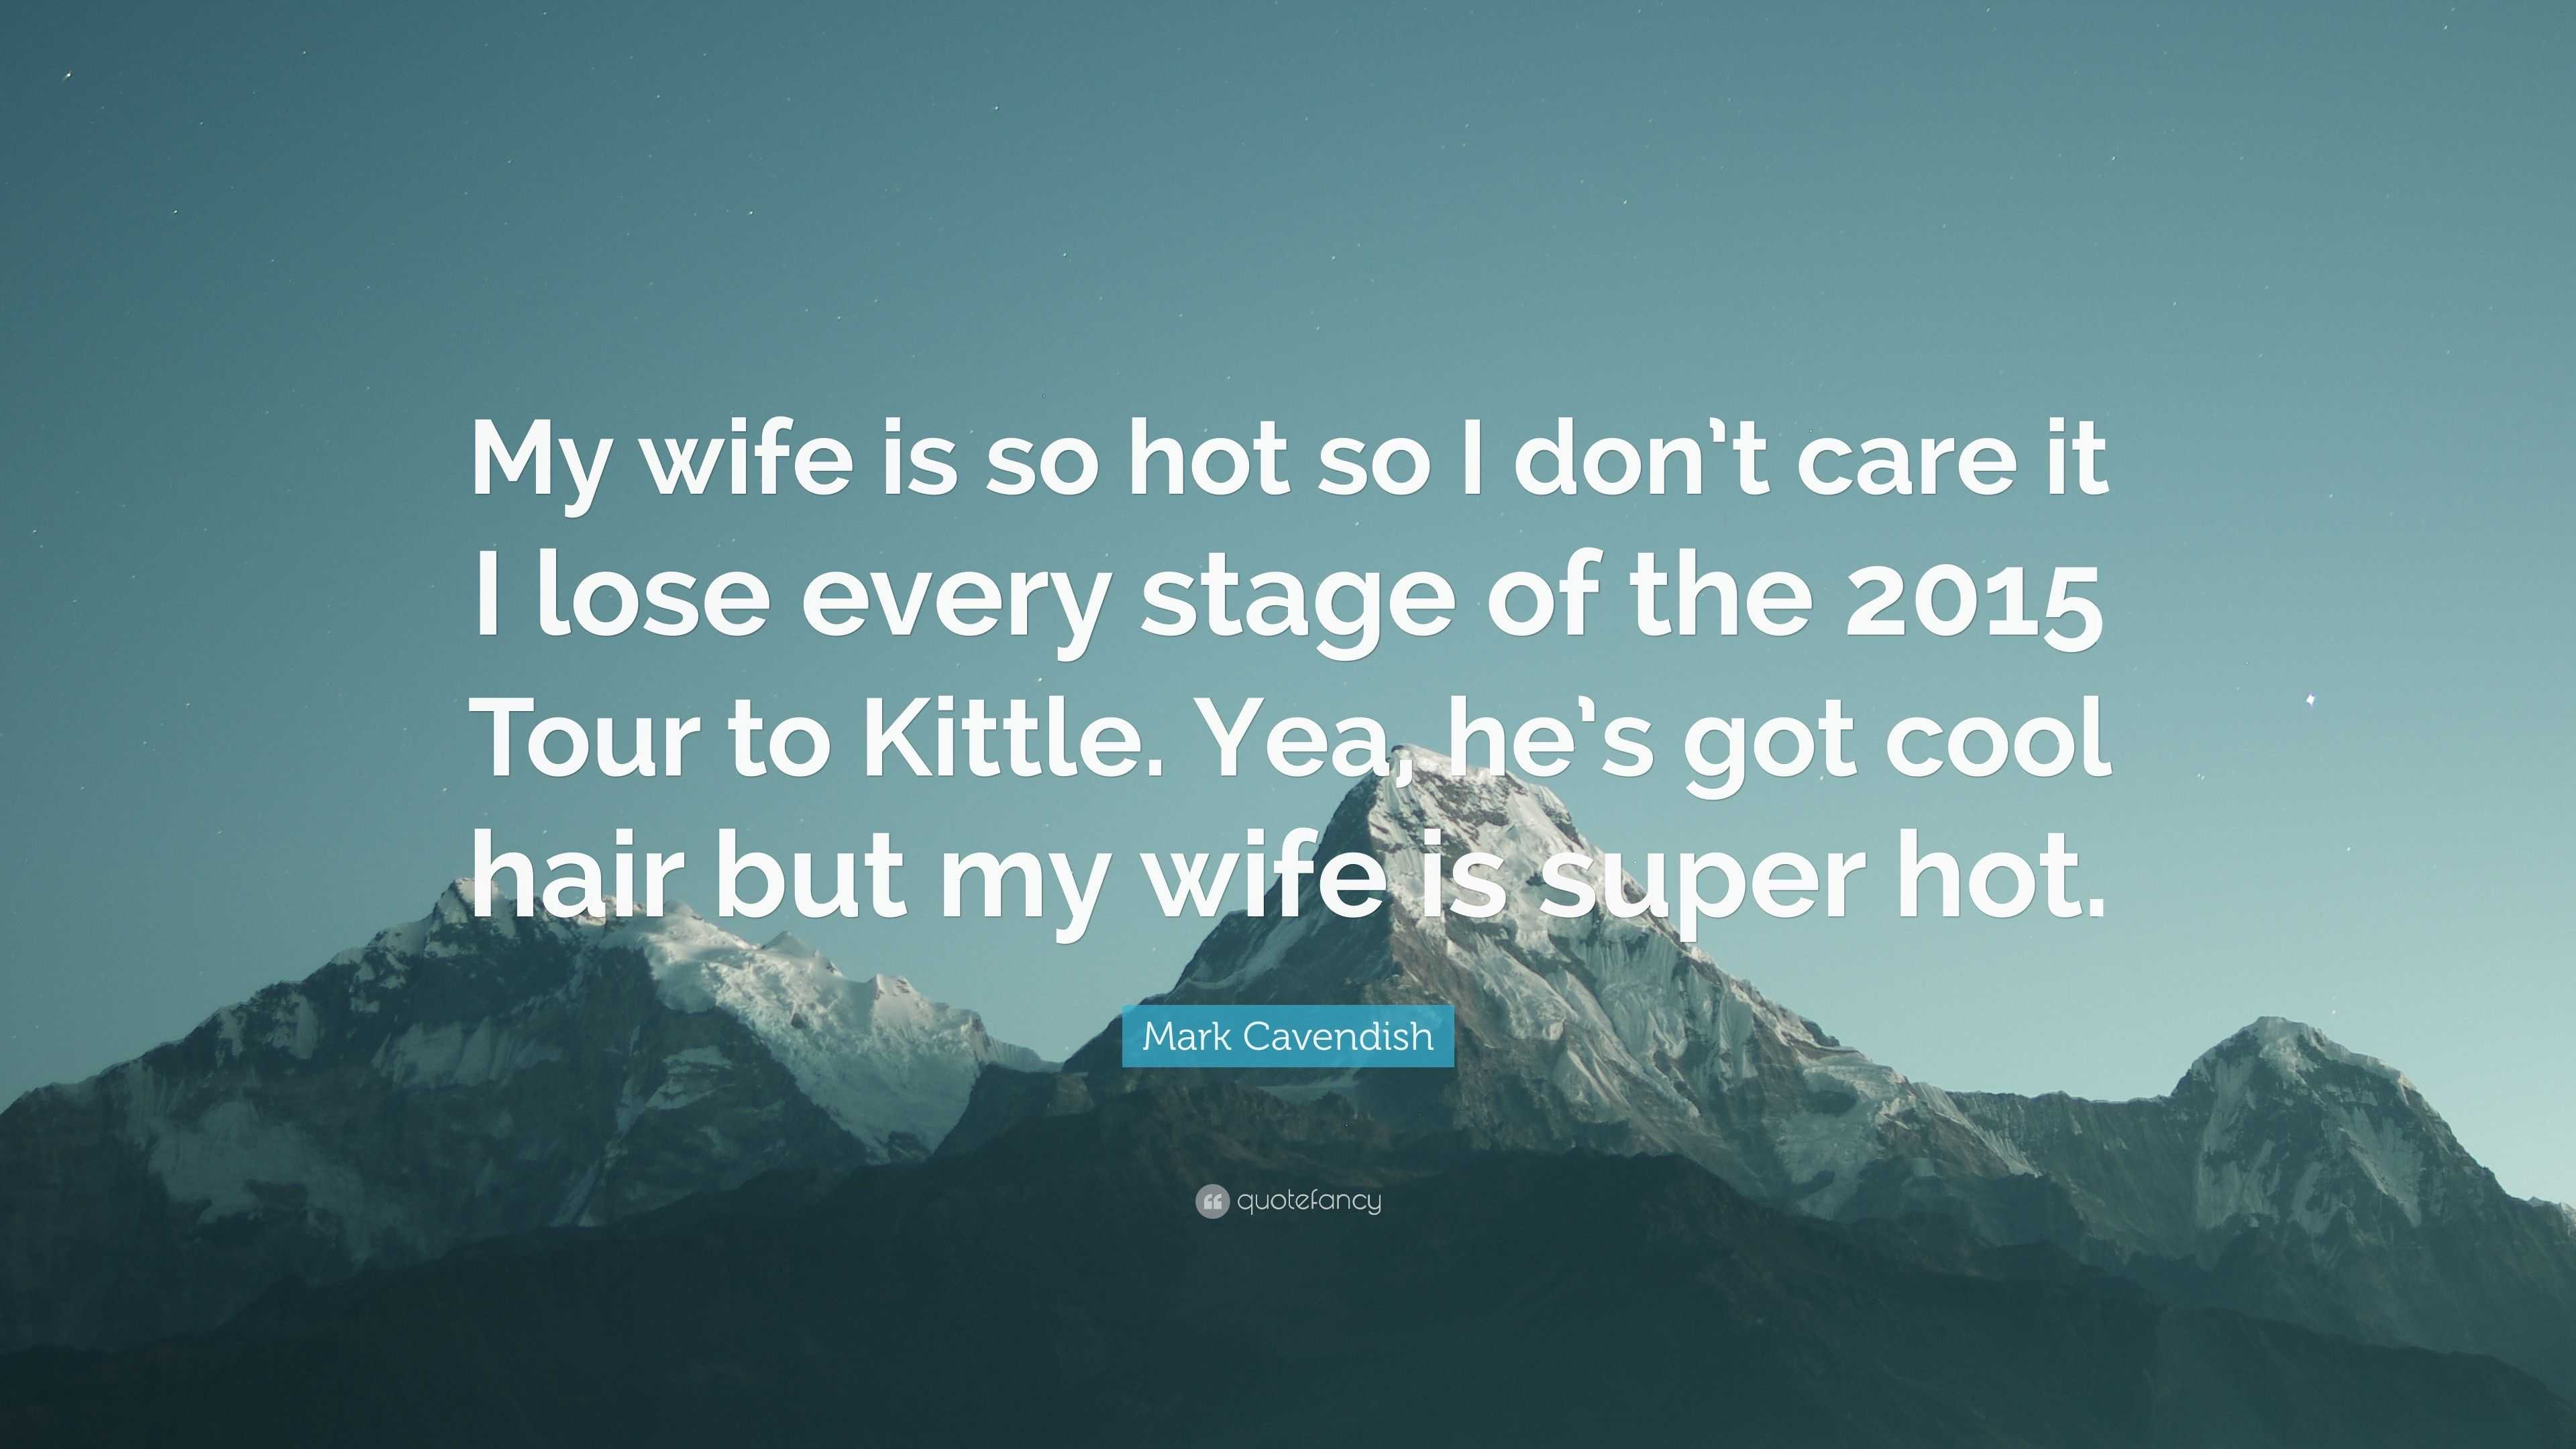 dillon tillman recommends Hot Wife Quotes